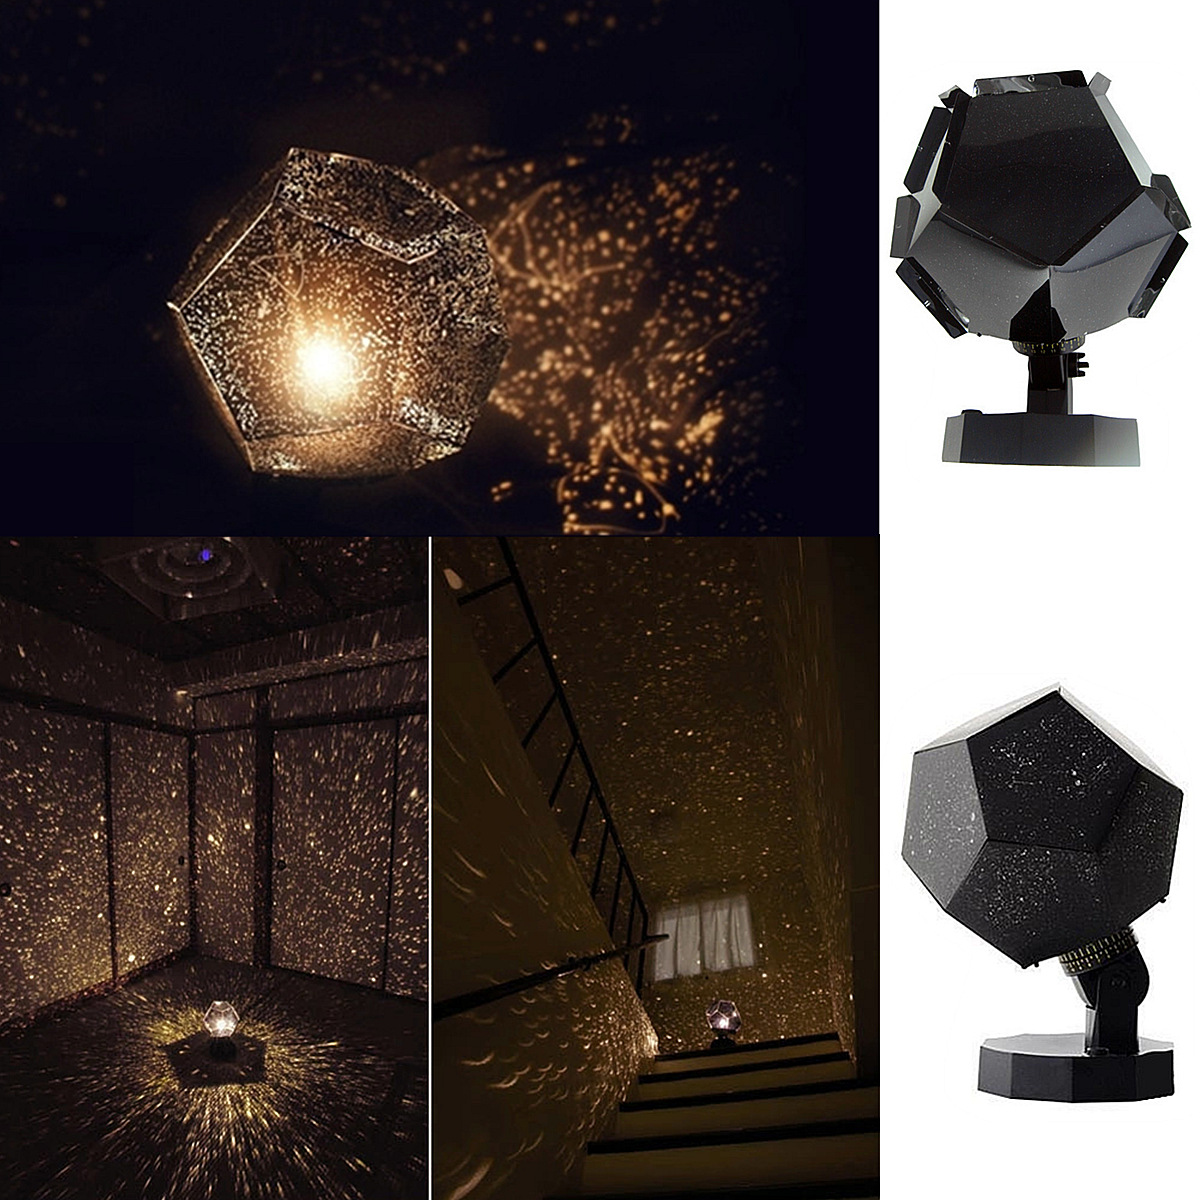 Find 3 Colors/Warm Color Bulb Light Home Decor Romantic Astro Star Projection Cosmos Night Light Bedroom Decoration Lighting Gadgets Projector for Sale on Gipsybee.com with cryptocurrencies